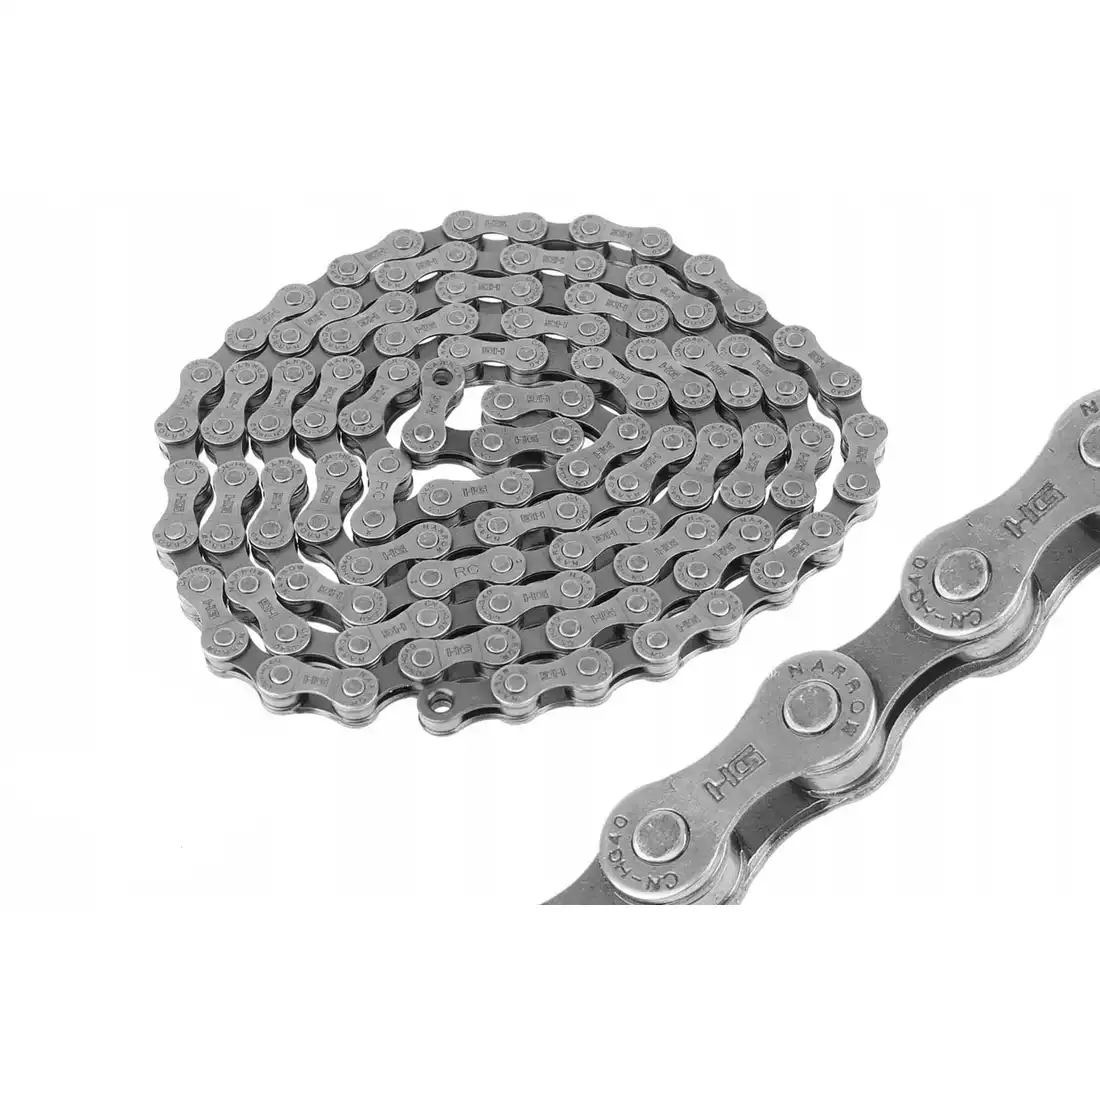 SHIMANO CN-HG-40 bicycle chain 6/7/8 speed, 114 links